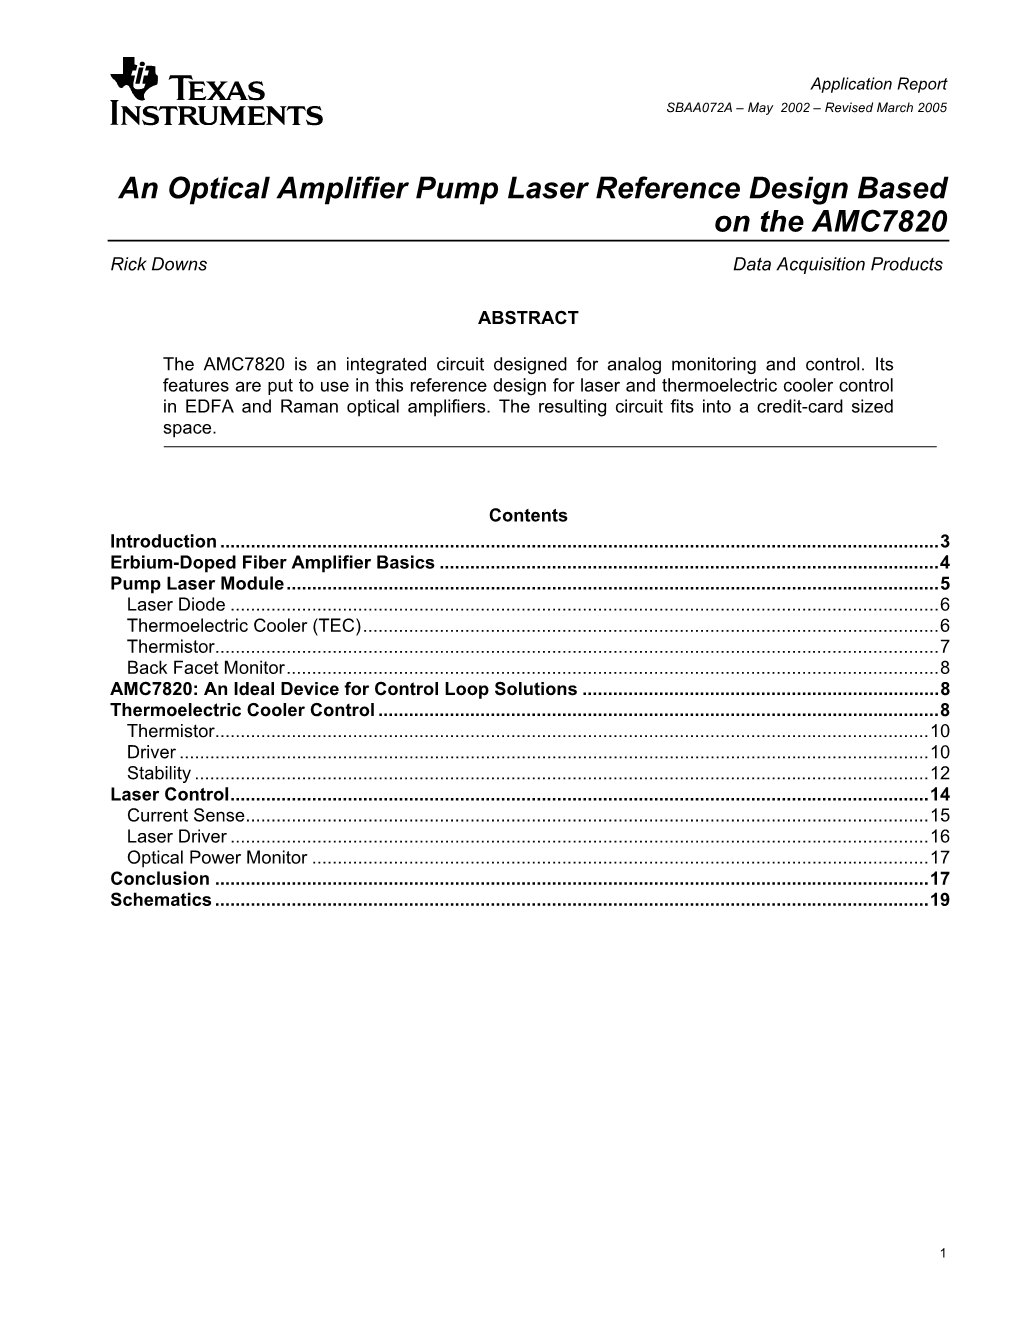 An Optical Amplifier Pump Laser Reference Design Based on the AMC7820